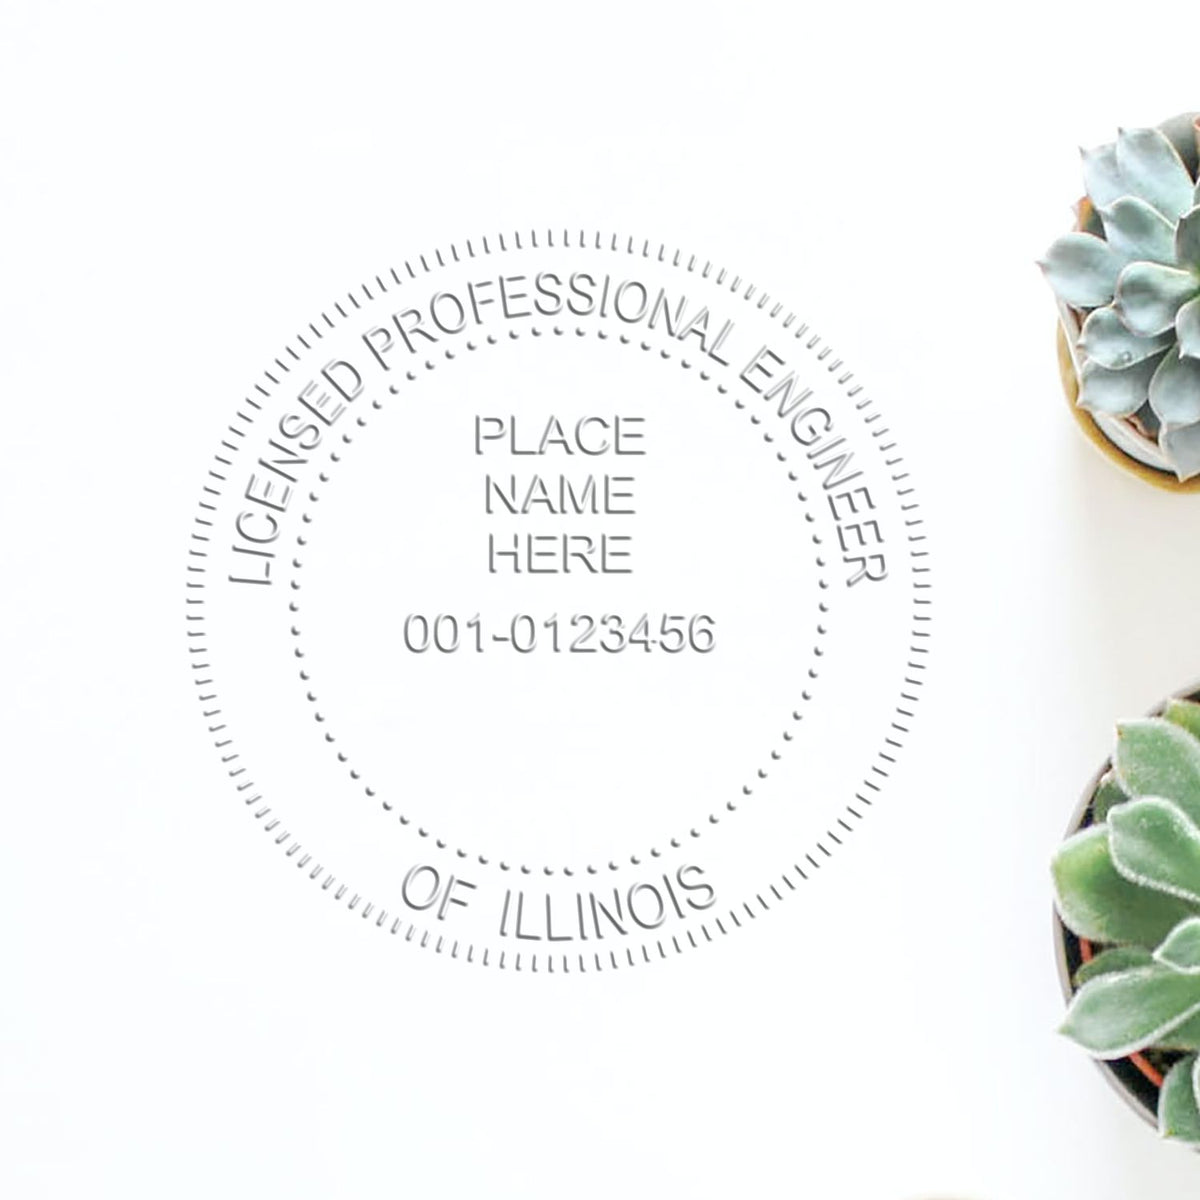 A stamped imprint of the Gift Illinois Engineer Seal in this stylish lifestyle photo, setting the tone for a unique and personalized product.